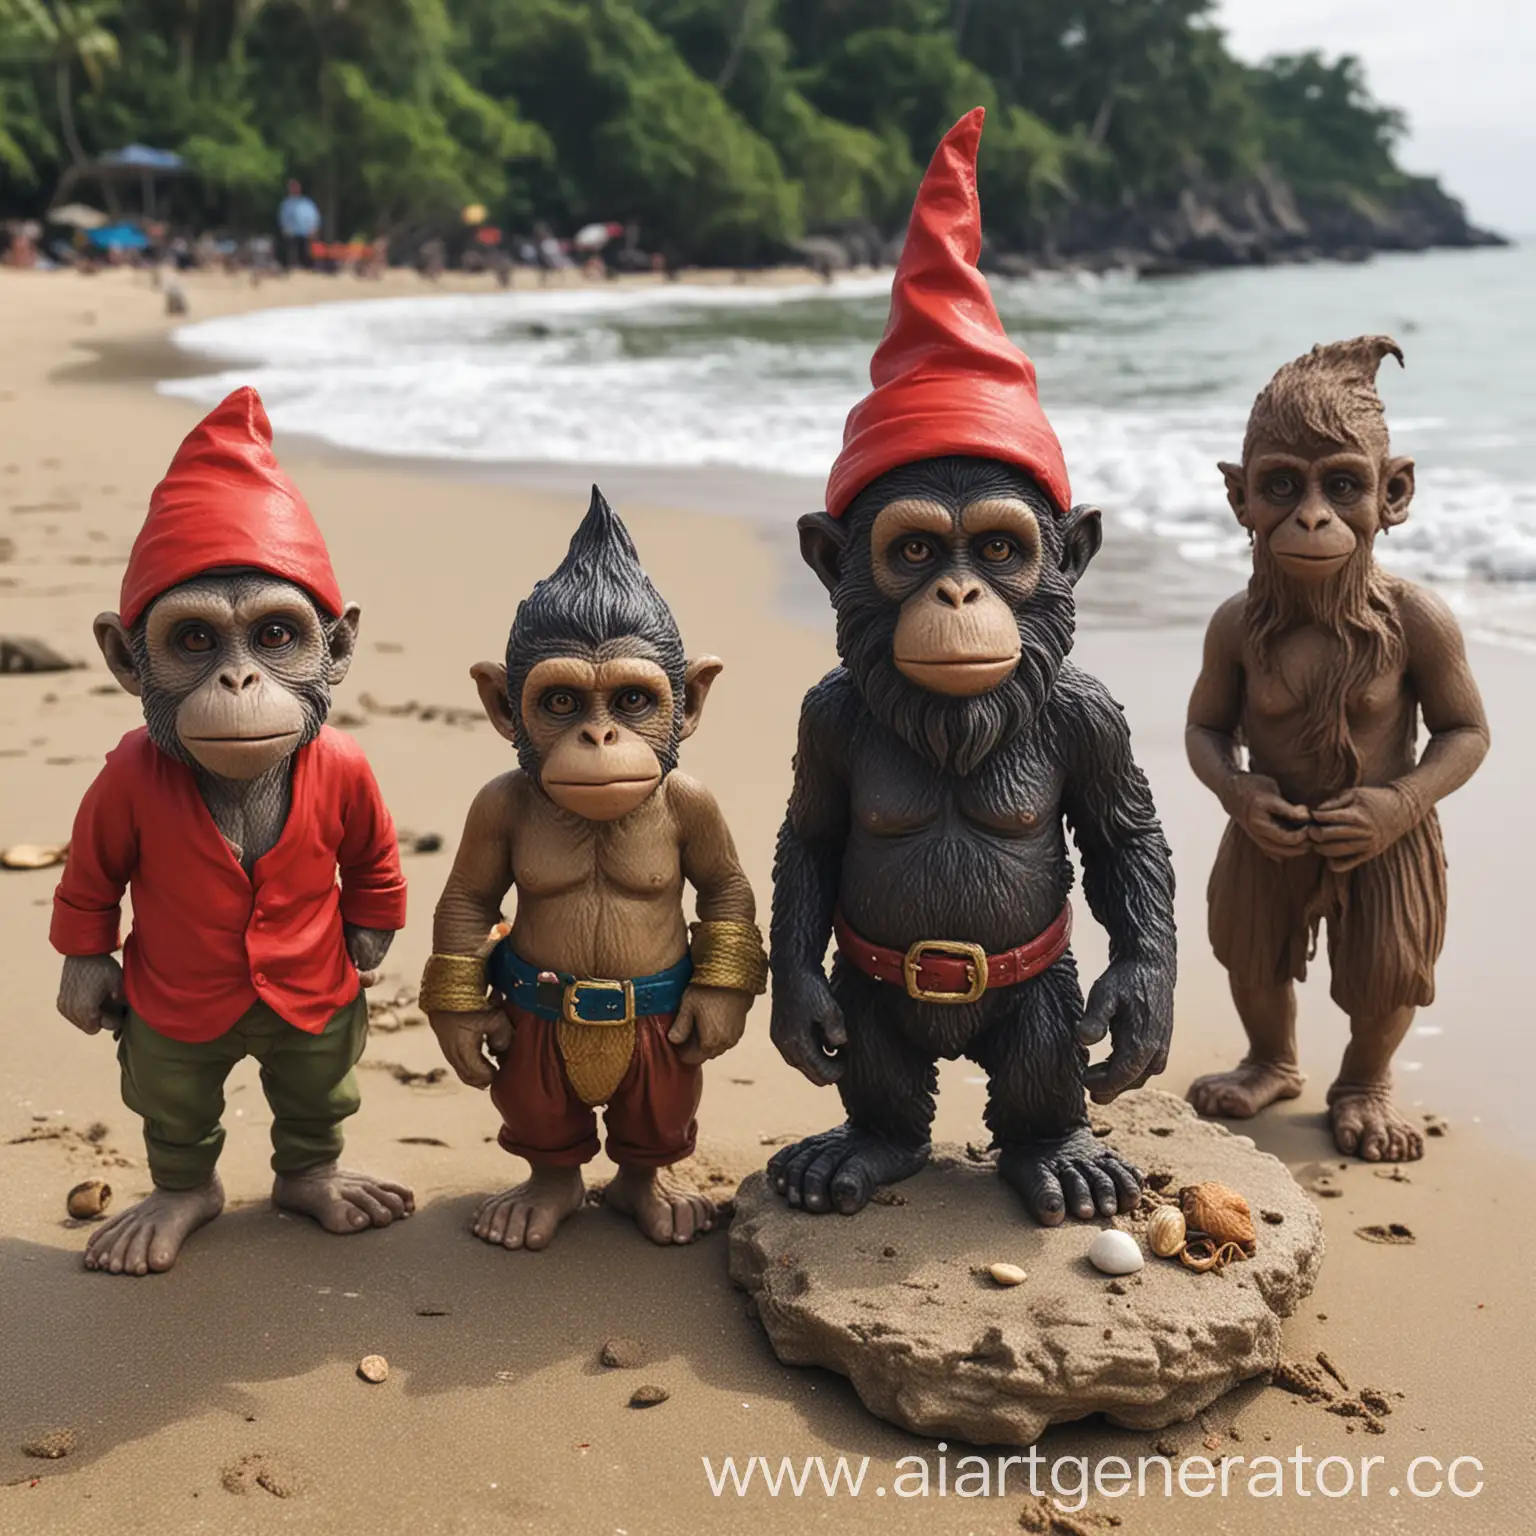 Monkeys-Diman-and-Sania-with-Evil-Gnome-Anryukha-on-the-Beach